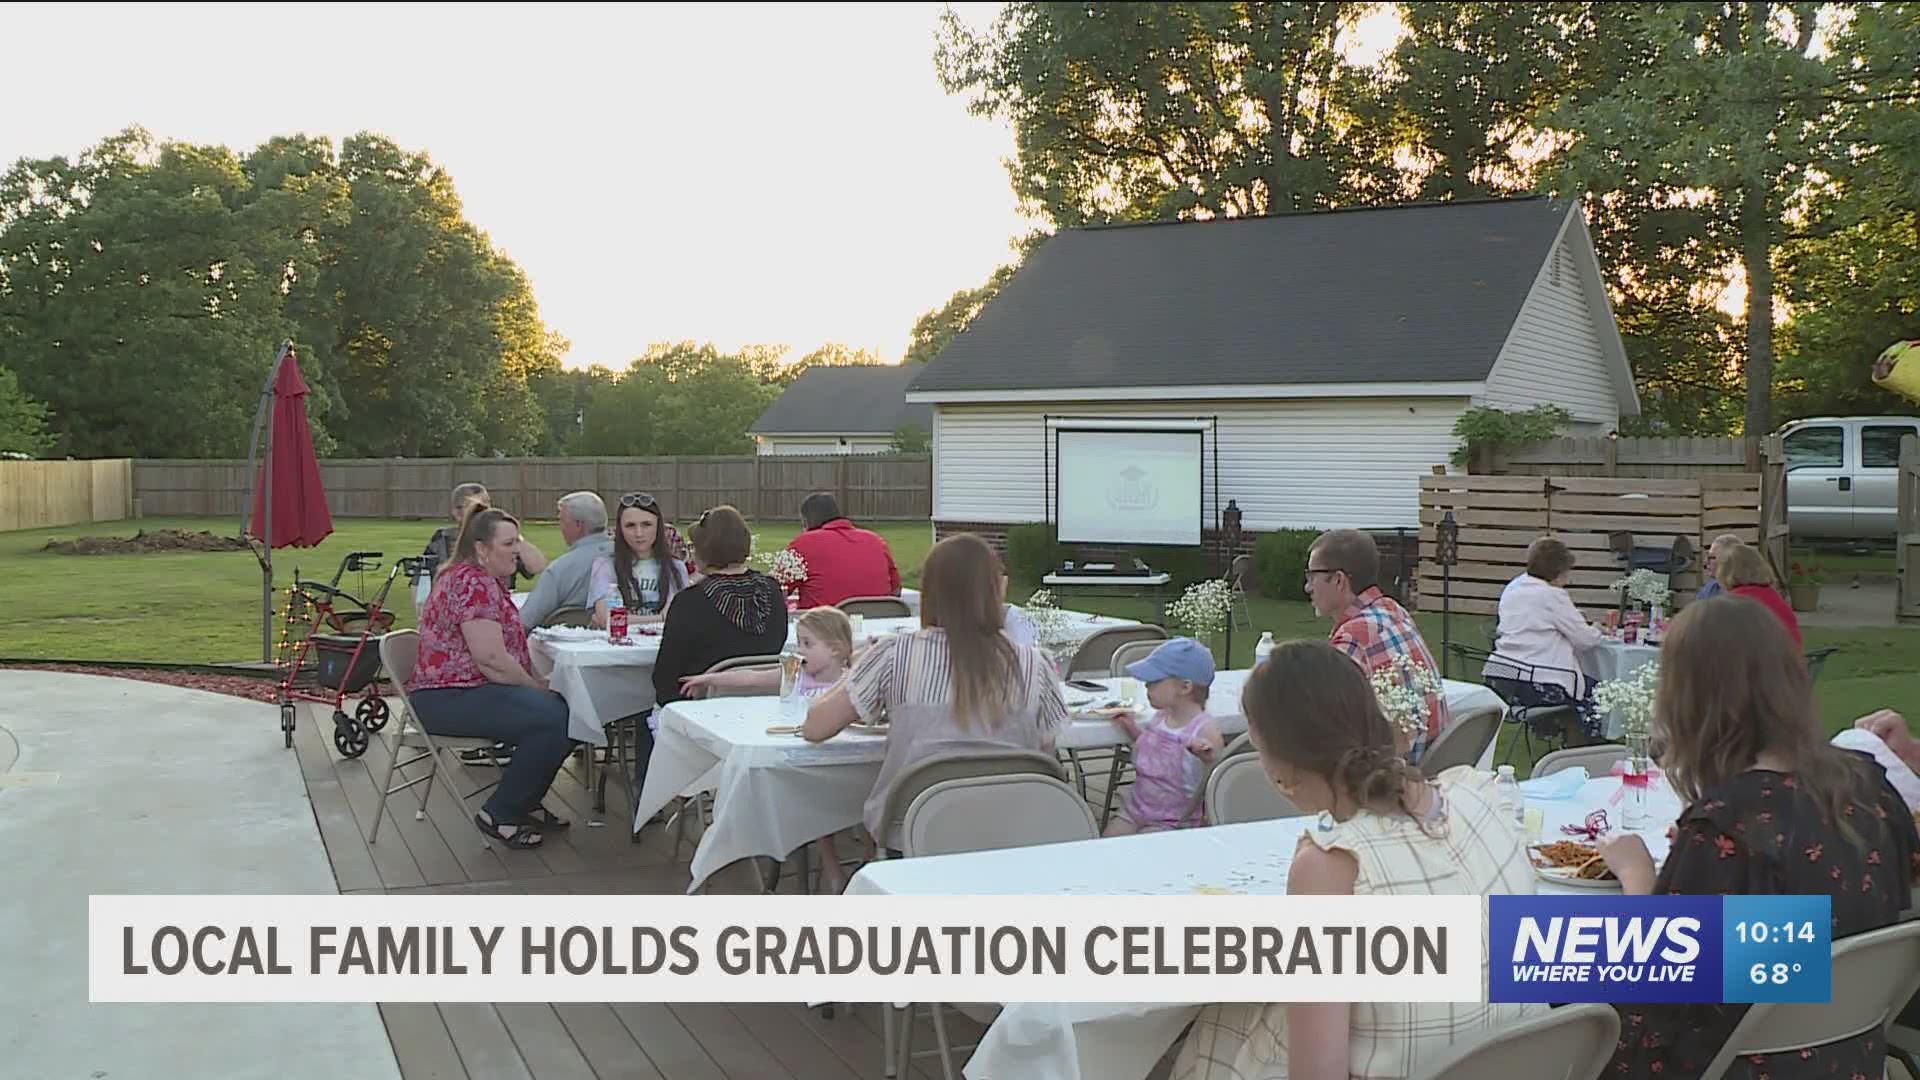 Traditional high school graduations were canceled this year due to the coronavirus pandemic, but some school districts found a way to still honor the students.